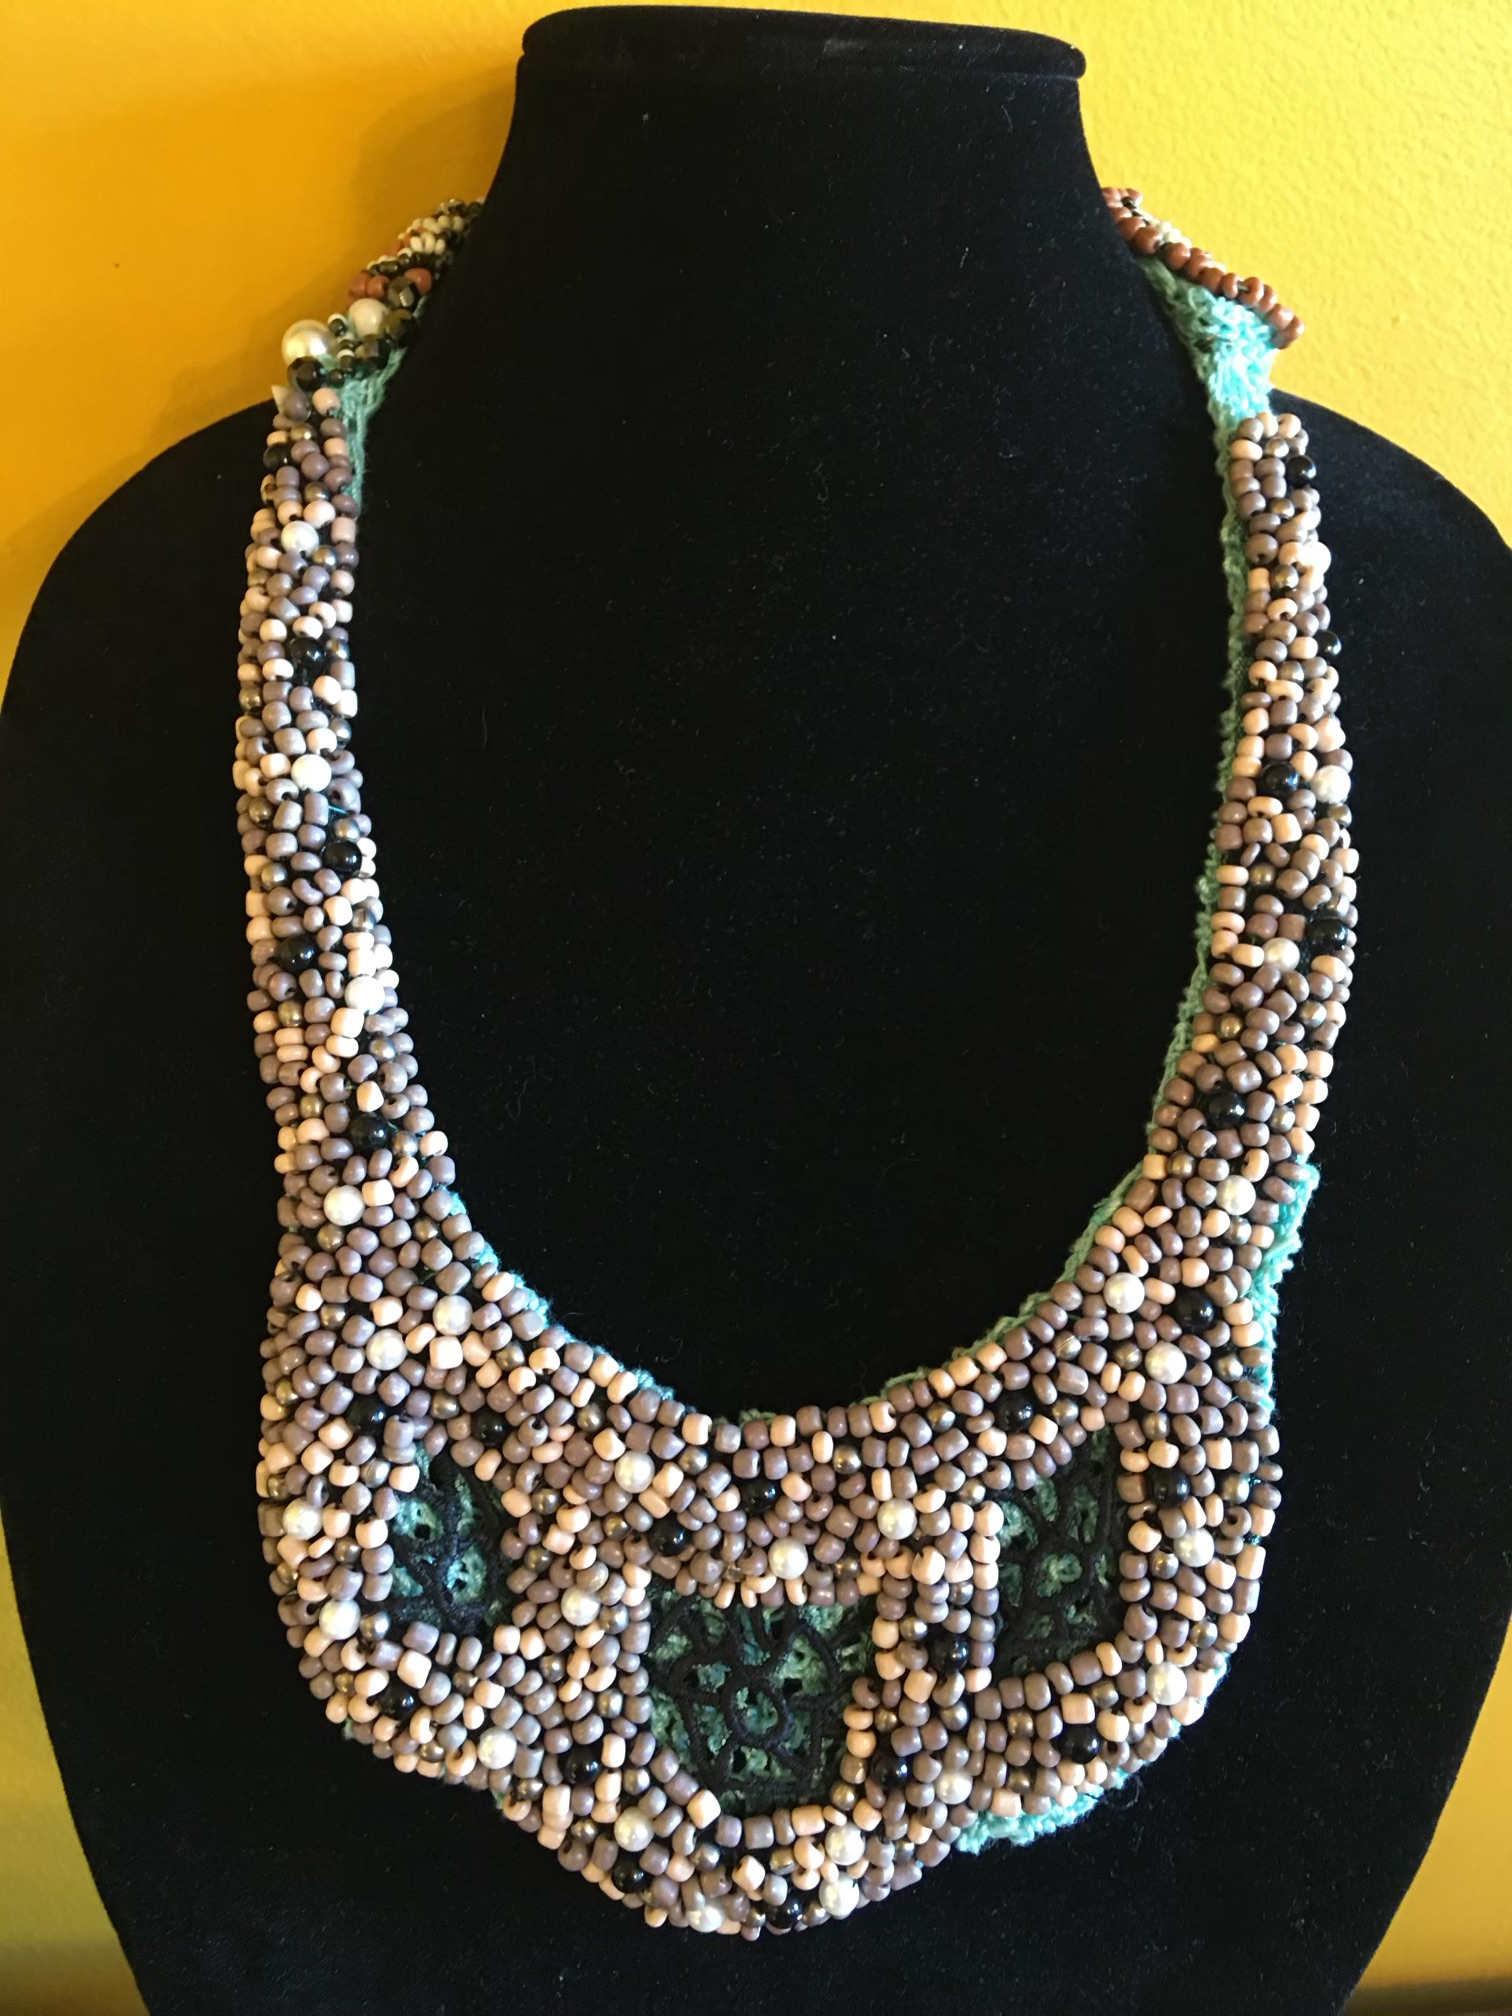 ENCRUSTED BEADING NECKLACE